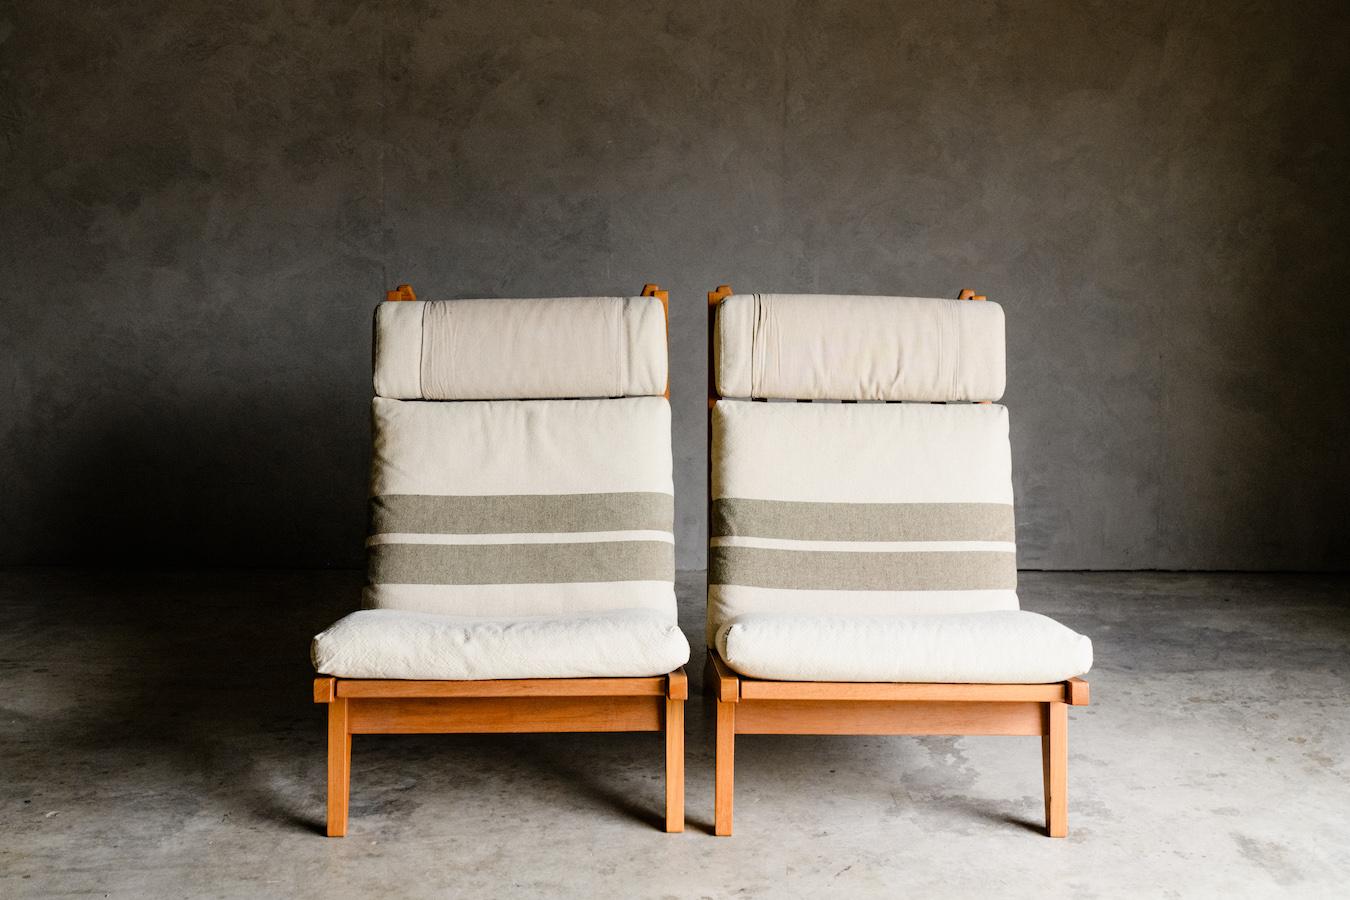 Vintage pair of Hans Wegner lounge chairs from Denmark, Circa 1960. Solid oak construction with cushions in a soft linen upholstery. Great condition with light ear and use. Model GE-375, made by GETAMA, Denmark.

 We don't have the time to write an